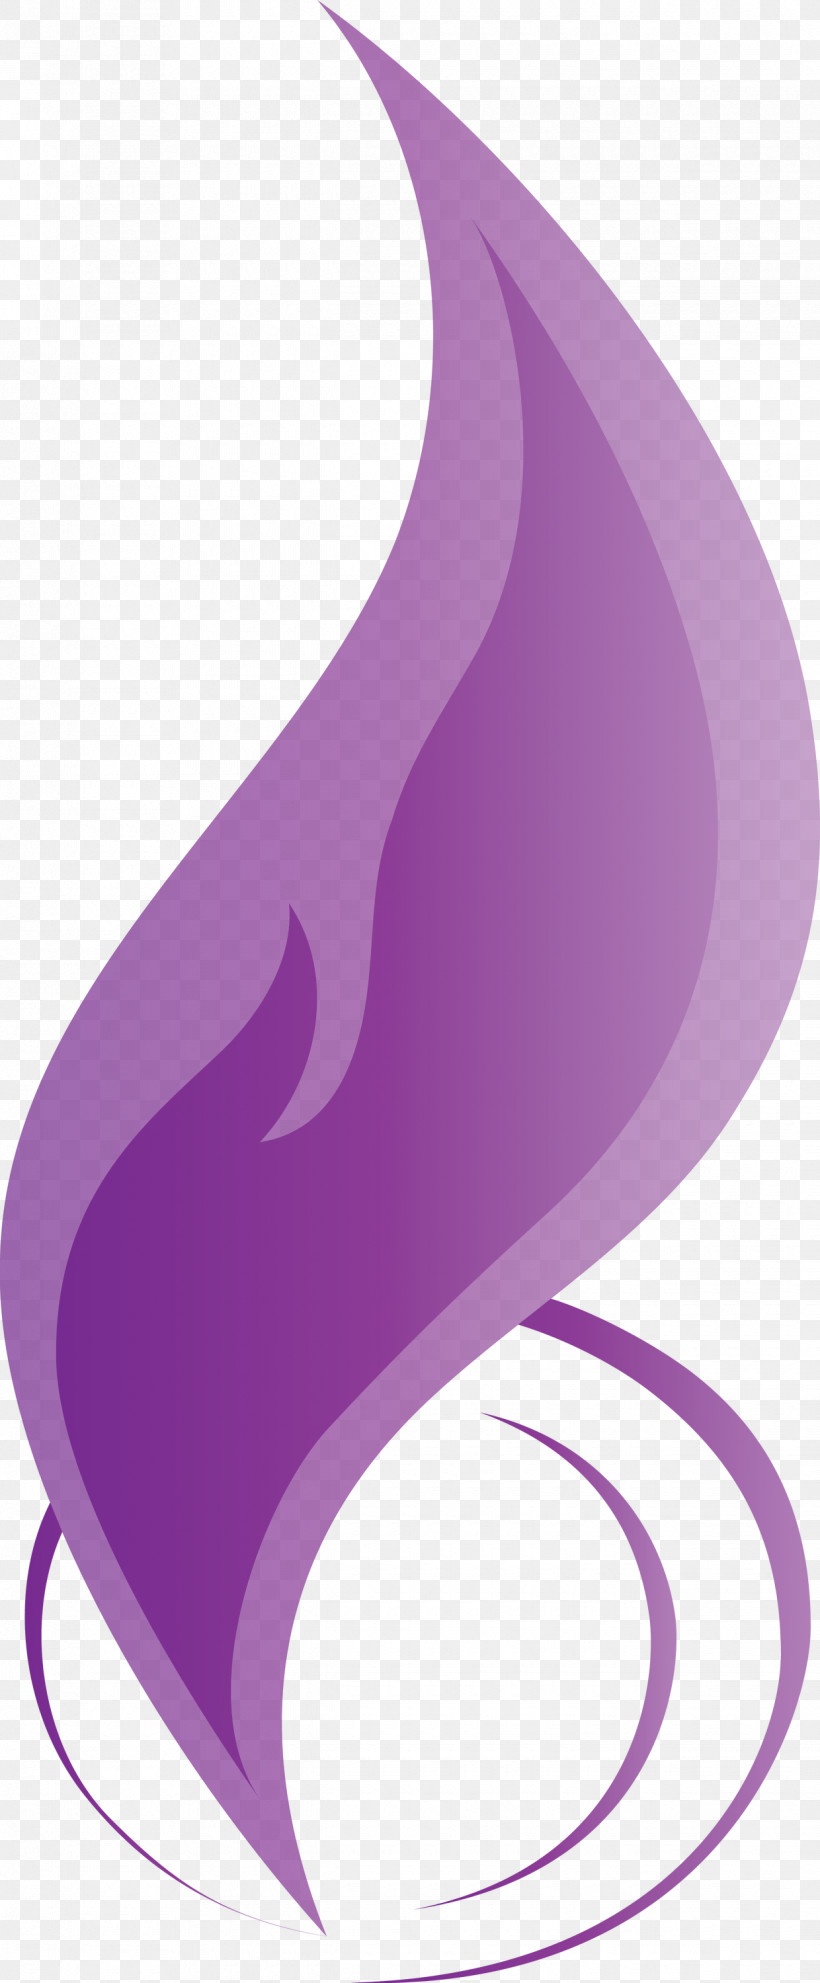 Fire Flame, PNG, 1240x2999px, Fire, Cartoon, Flame, Geometry, Lavender Download Free